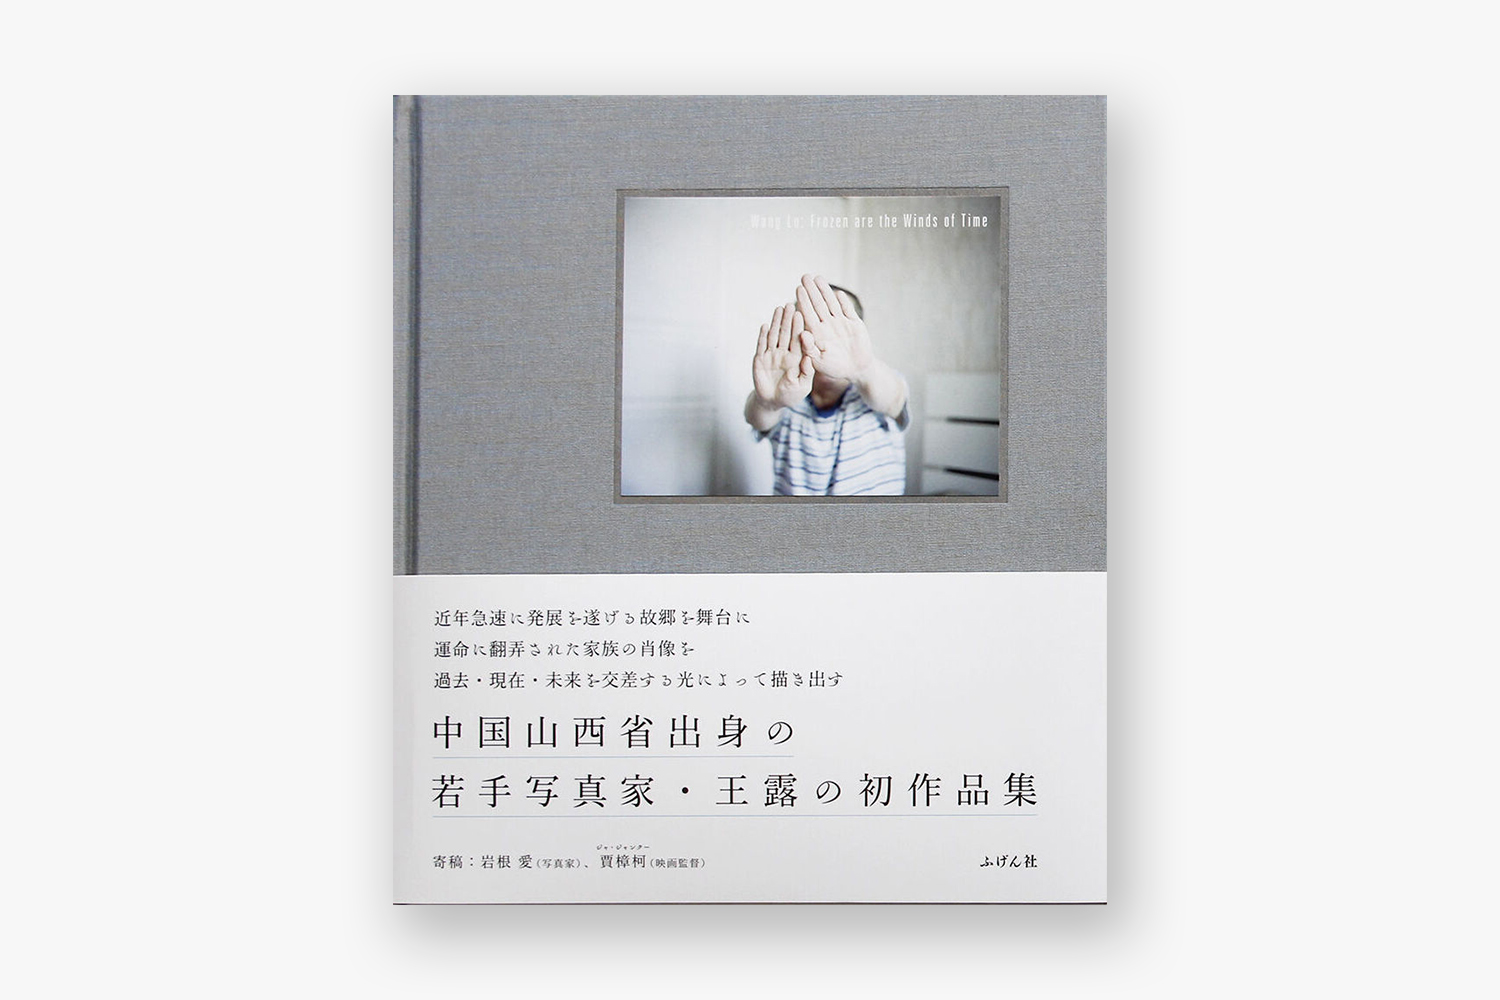 wang lu frozen are the winds of time book photography of china 1 cover - Frozen are the Winds of Time (A) |  - Frozen are the Winds of Time (A)